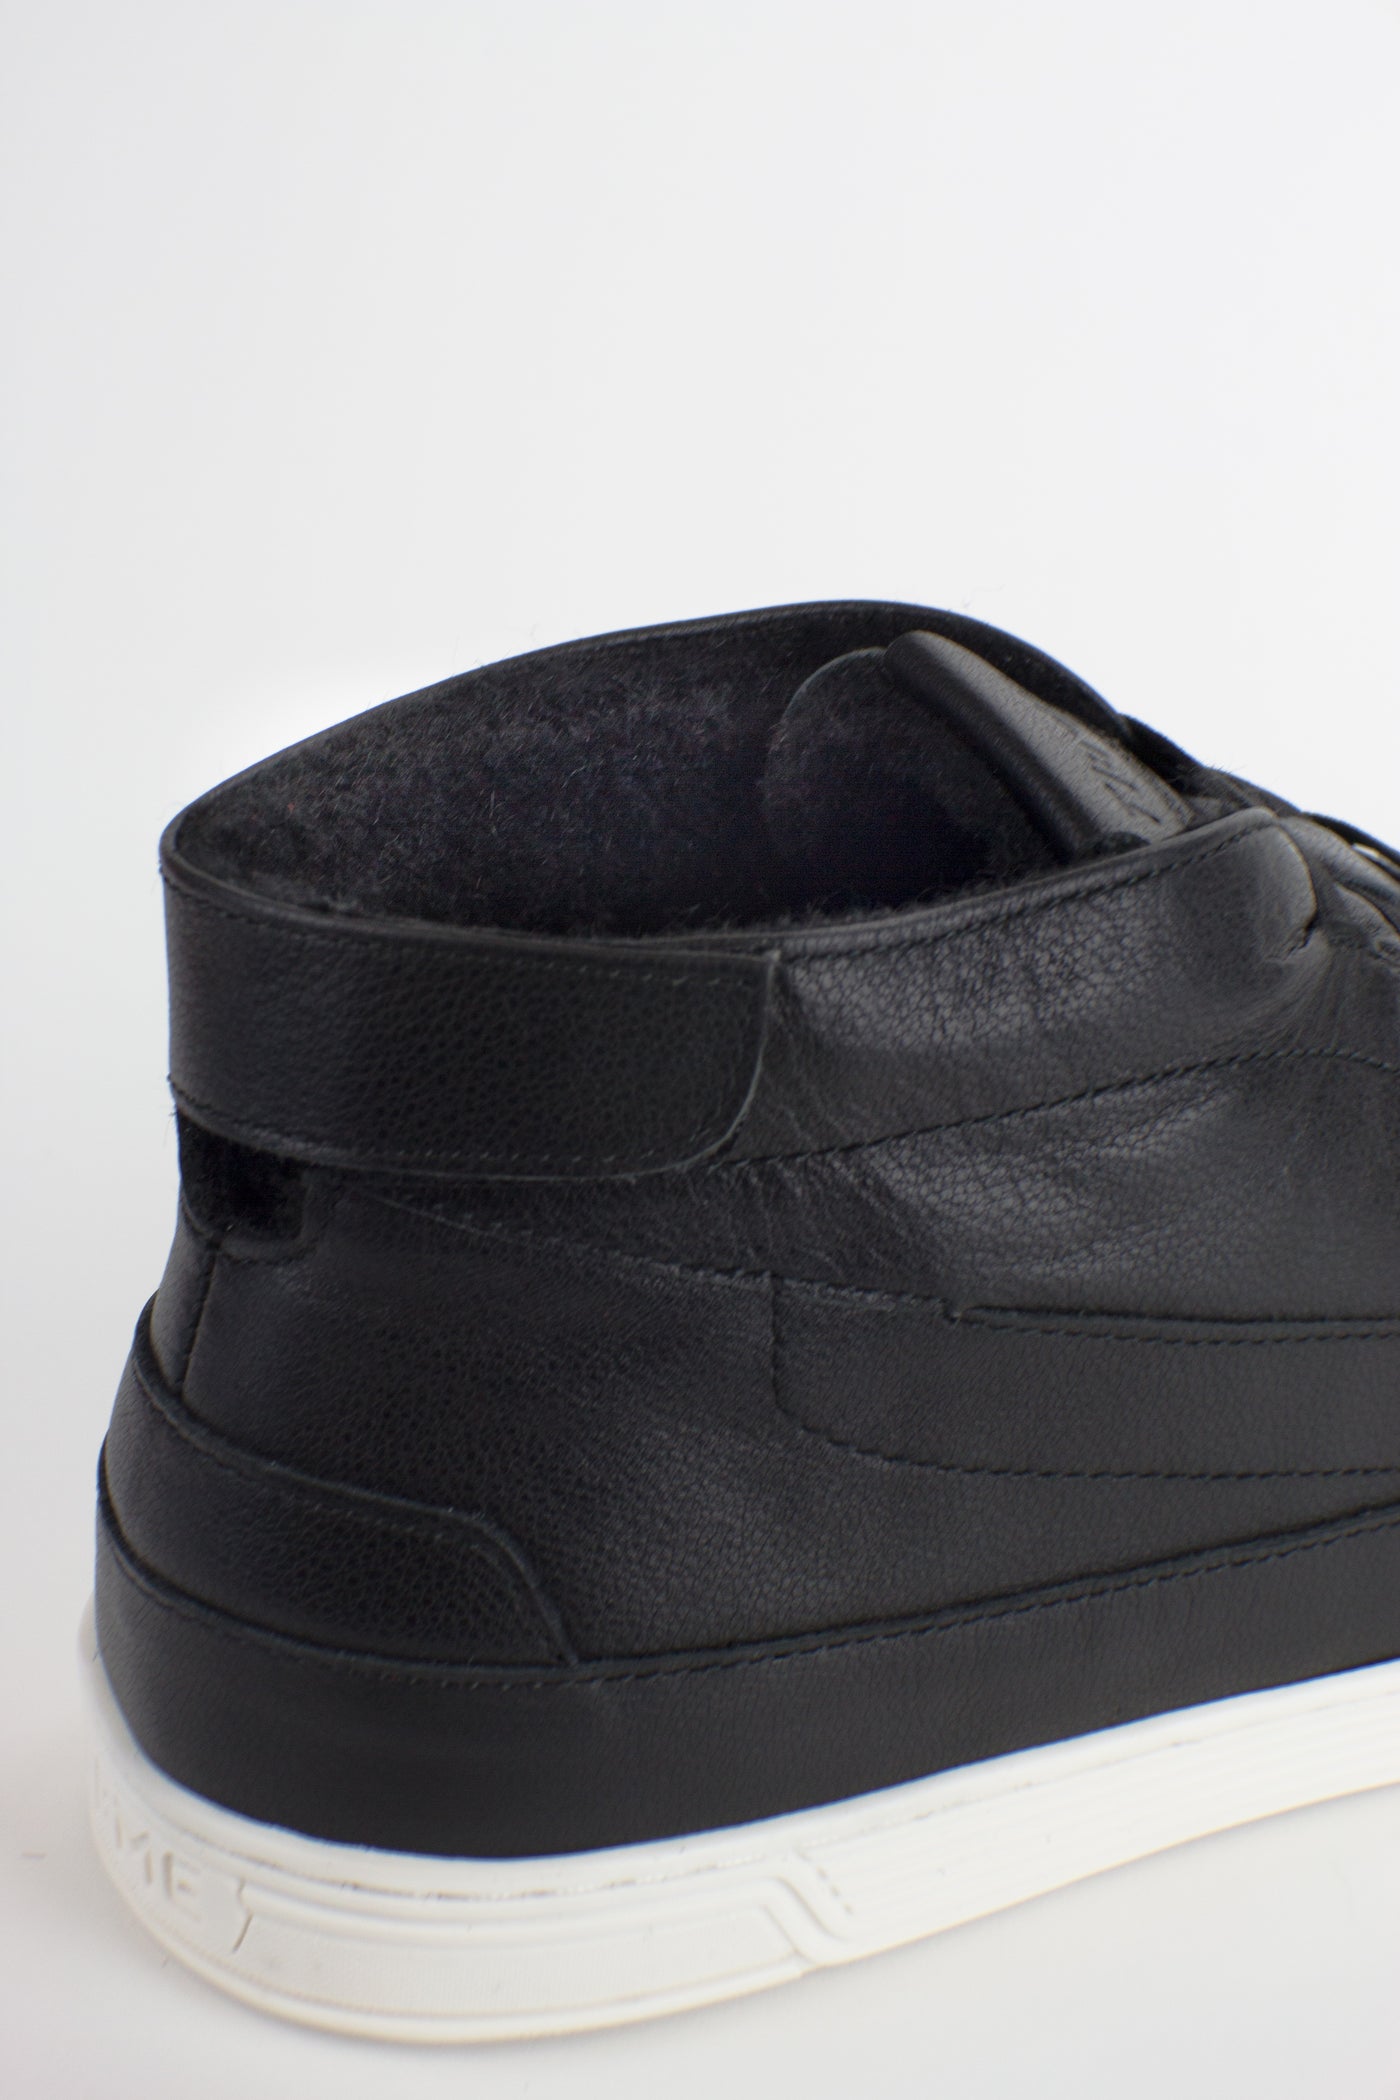 TIME Slippers-Men's Mid-top Slippers, #color_leather-black-white